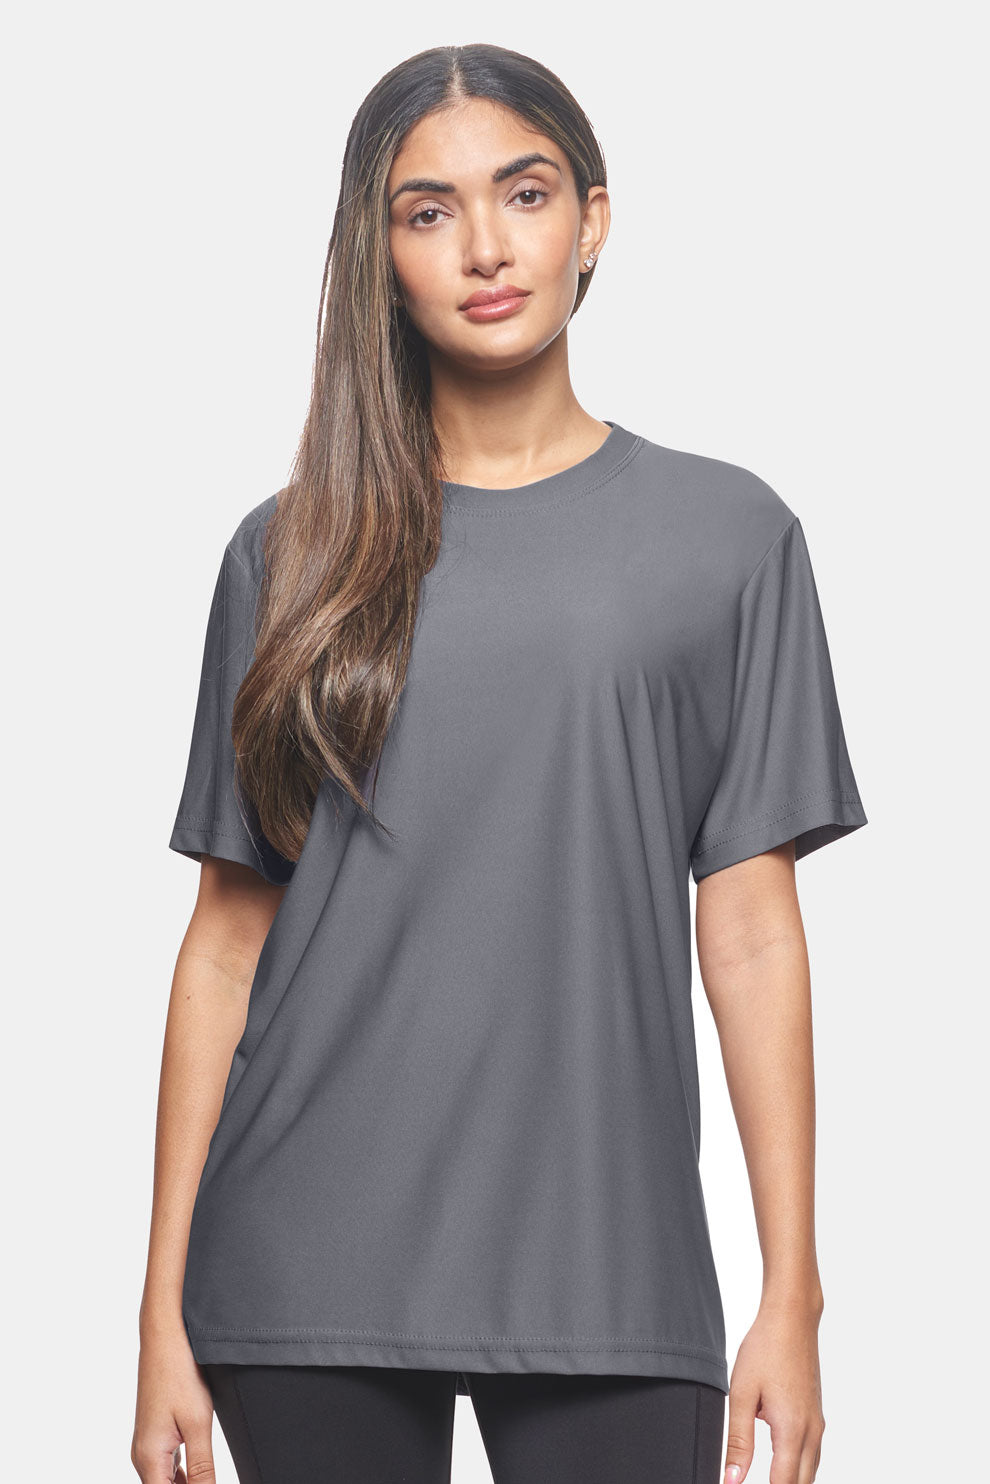 EcoTek Recycled Performance Tee Expert Brand Apparel image 4#color_charcoal